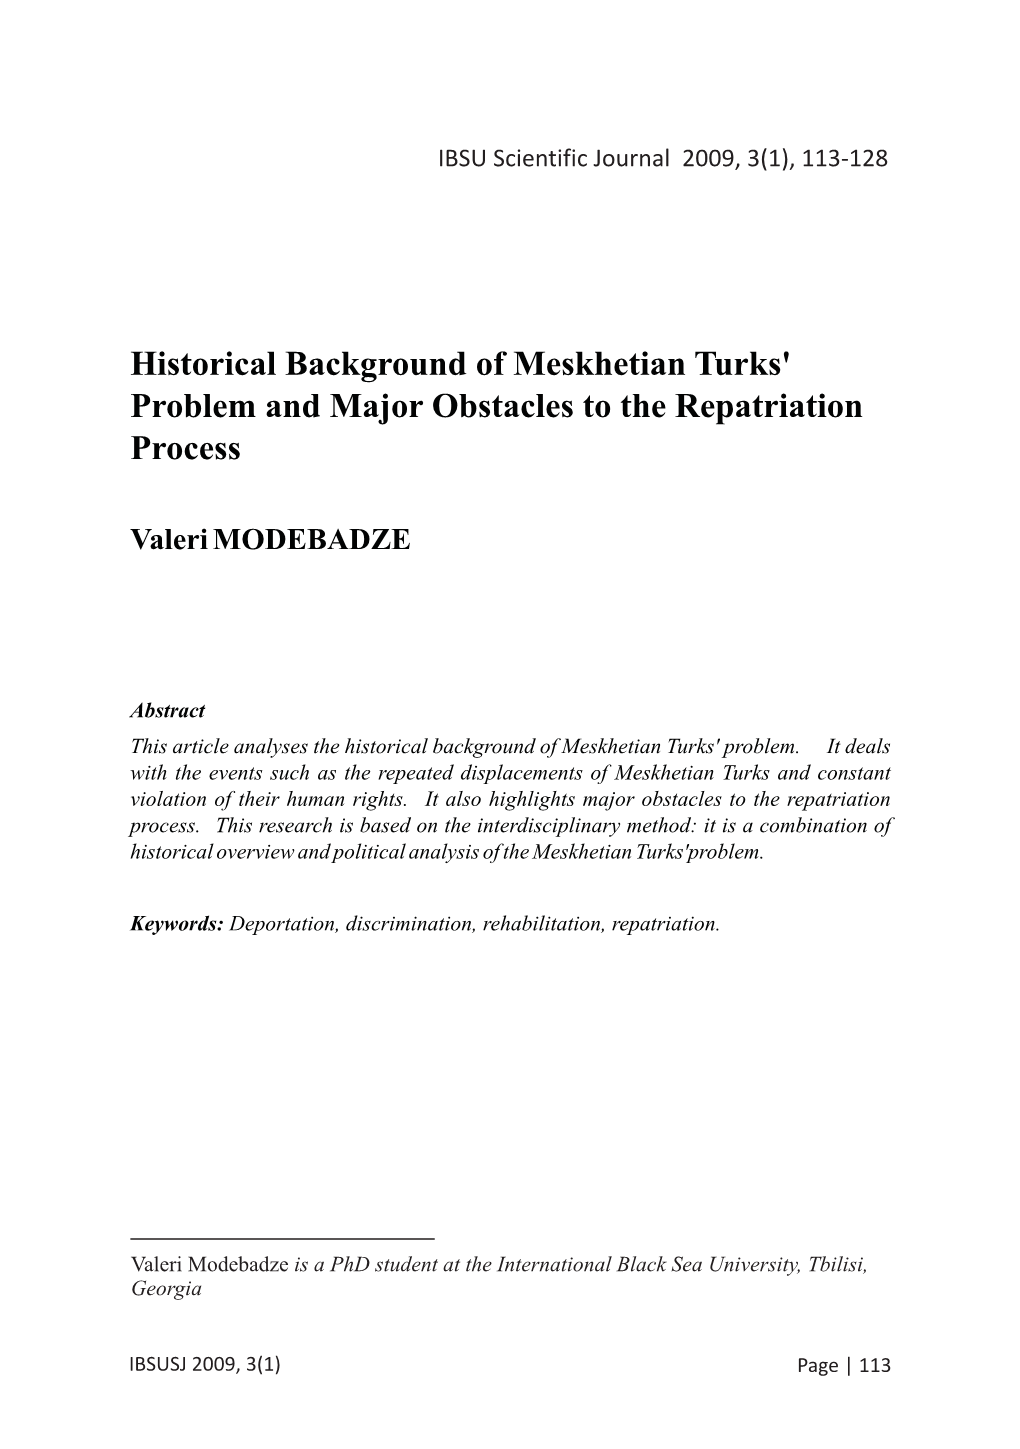 Historical Background of Meskhetian Turks' Problem and Major Obstacles to the Repatriation Process